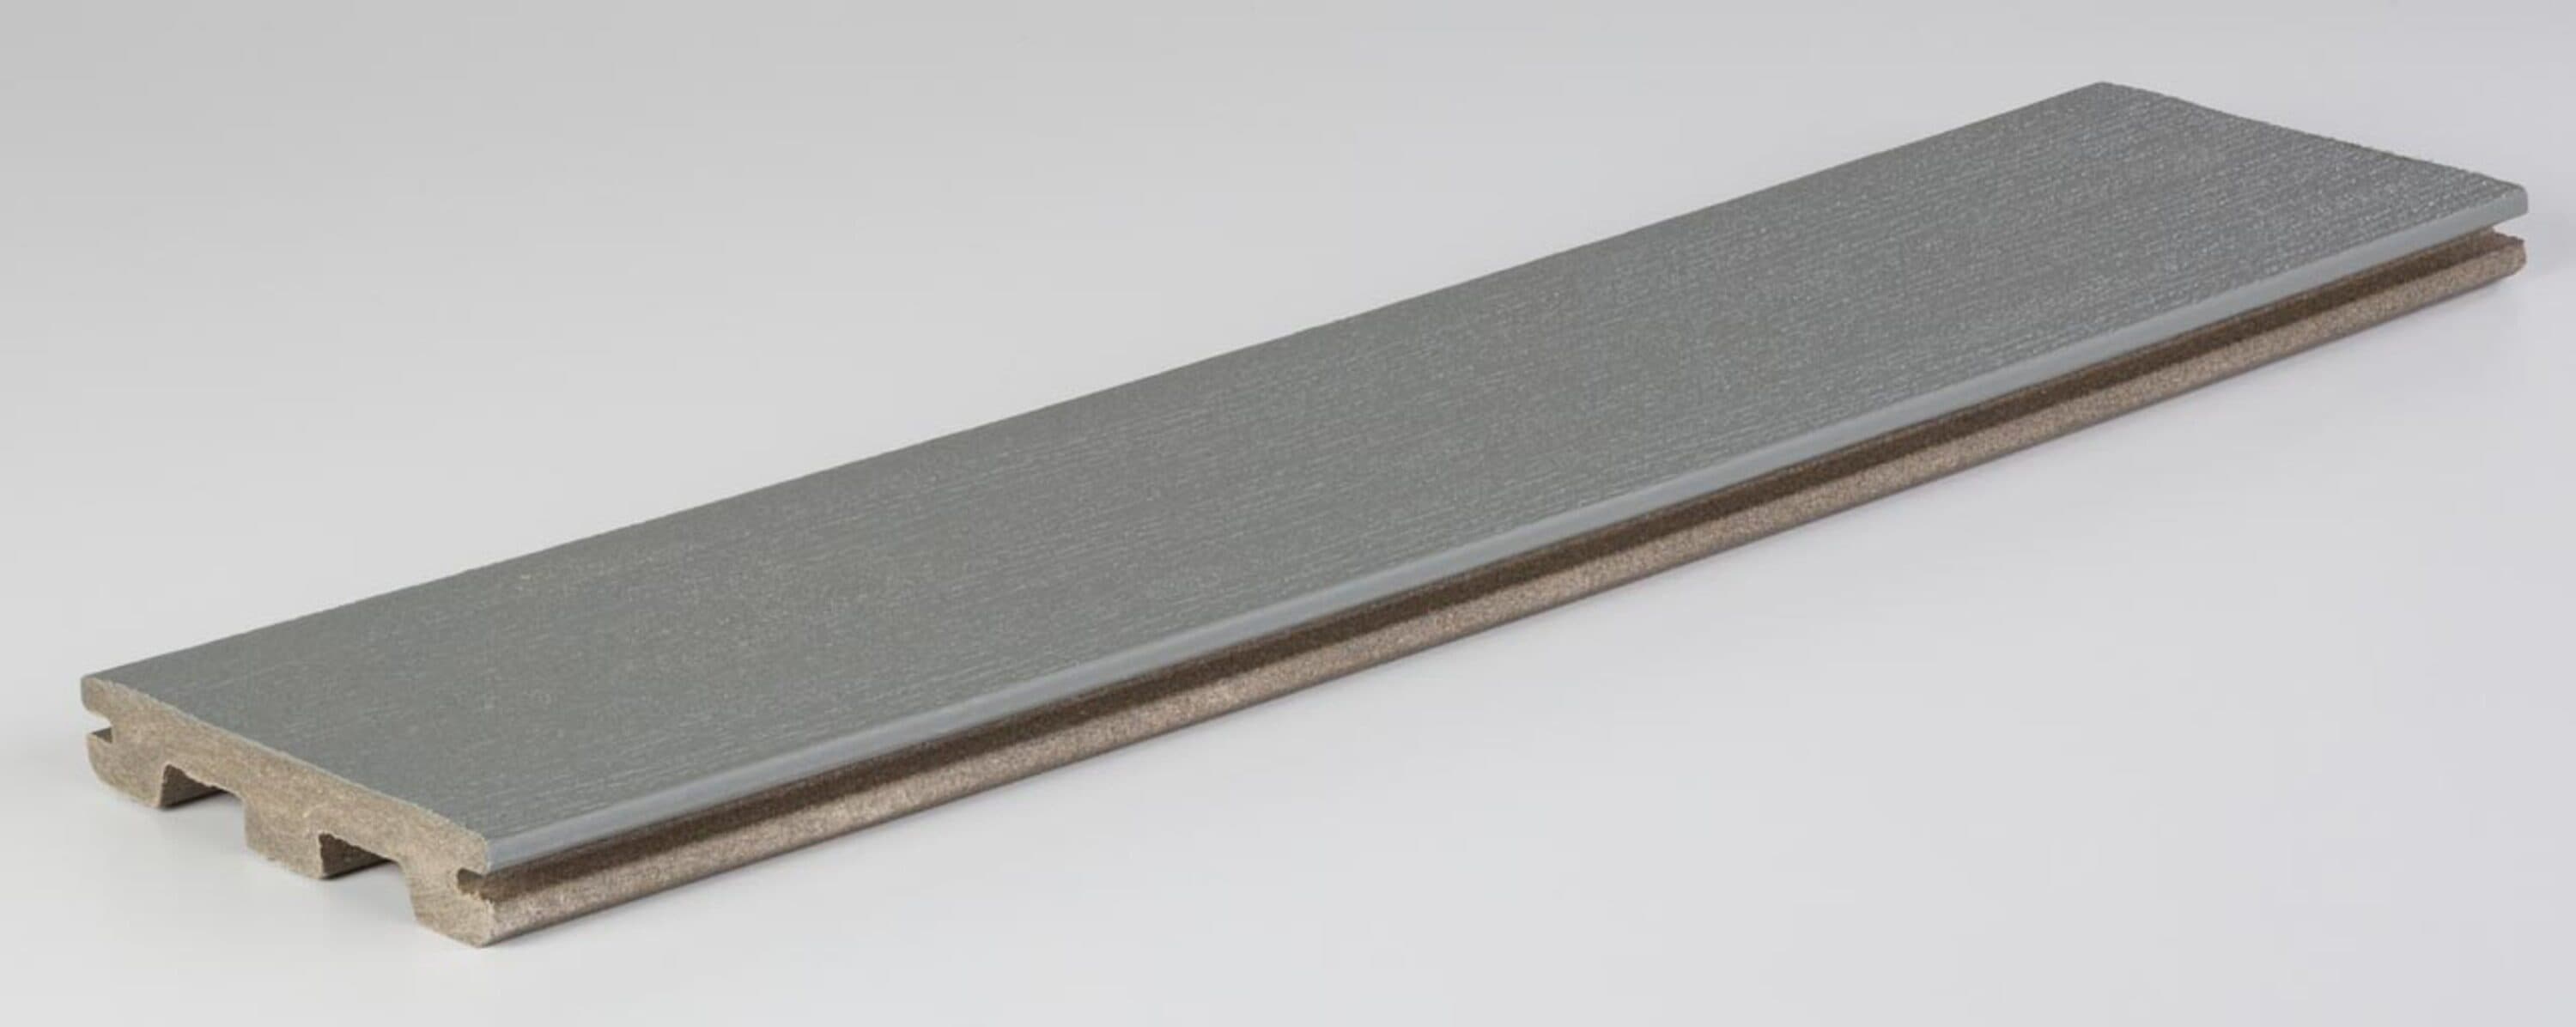 Prime 5/4-in x 6-in x 12-ft Maritime Gray Grooved Composite Deck Board | - TimberTech ESGV5412MG